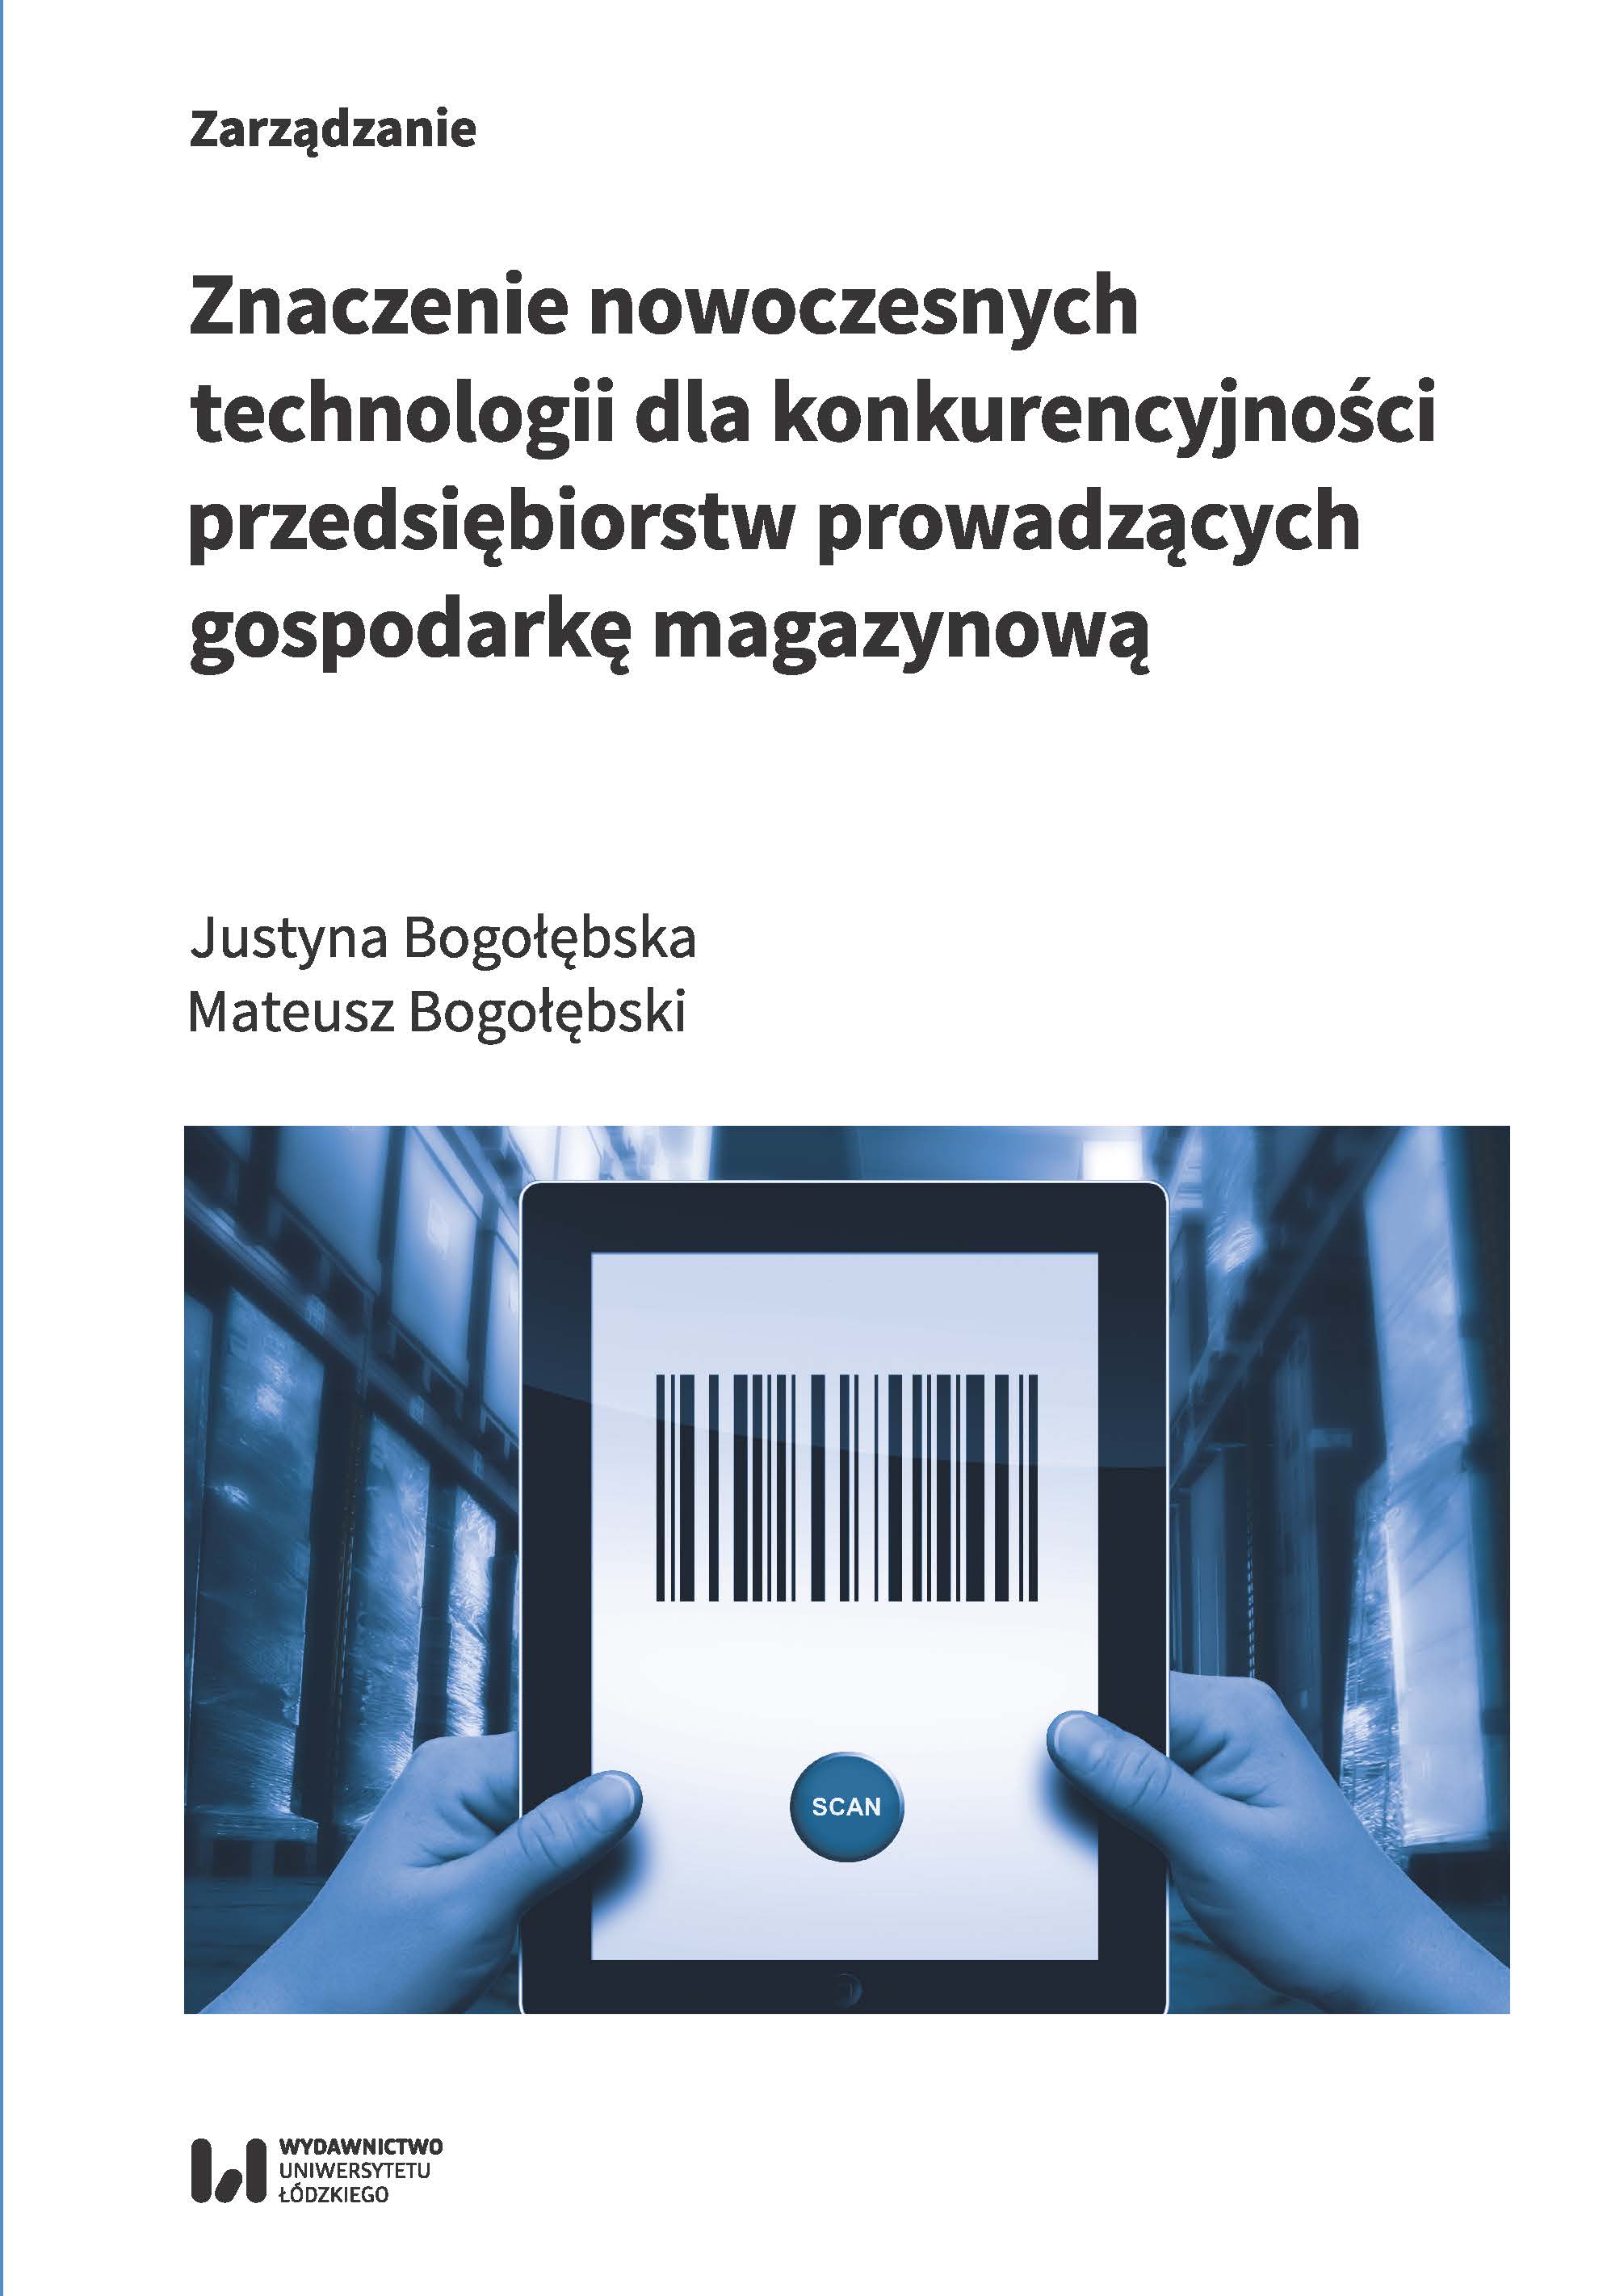 The Importance of Modern Technologies for the Competitiveness of Warehouse Companies